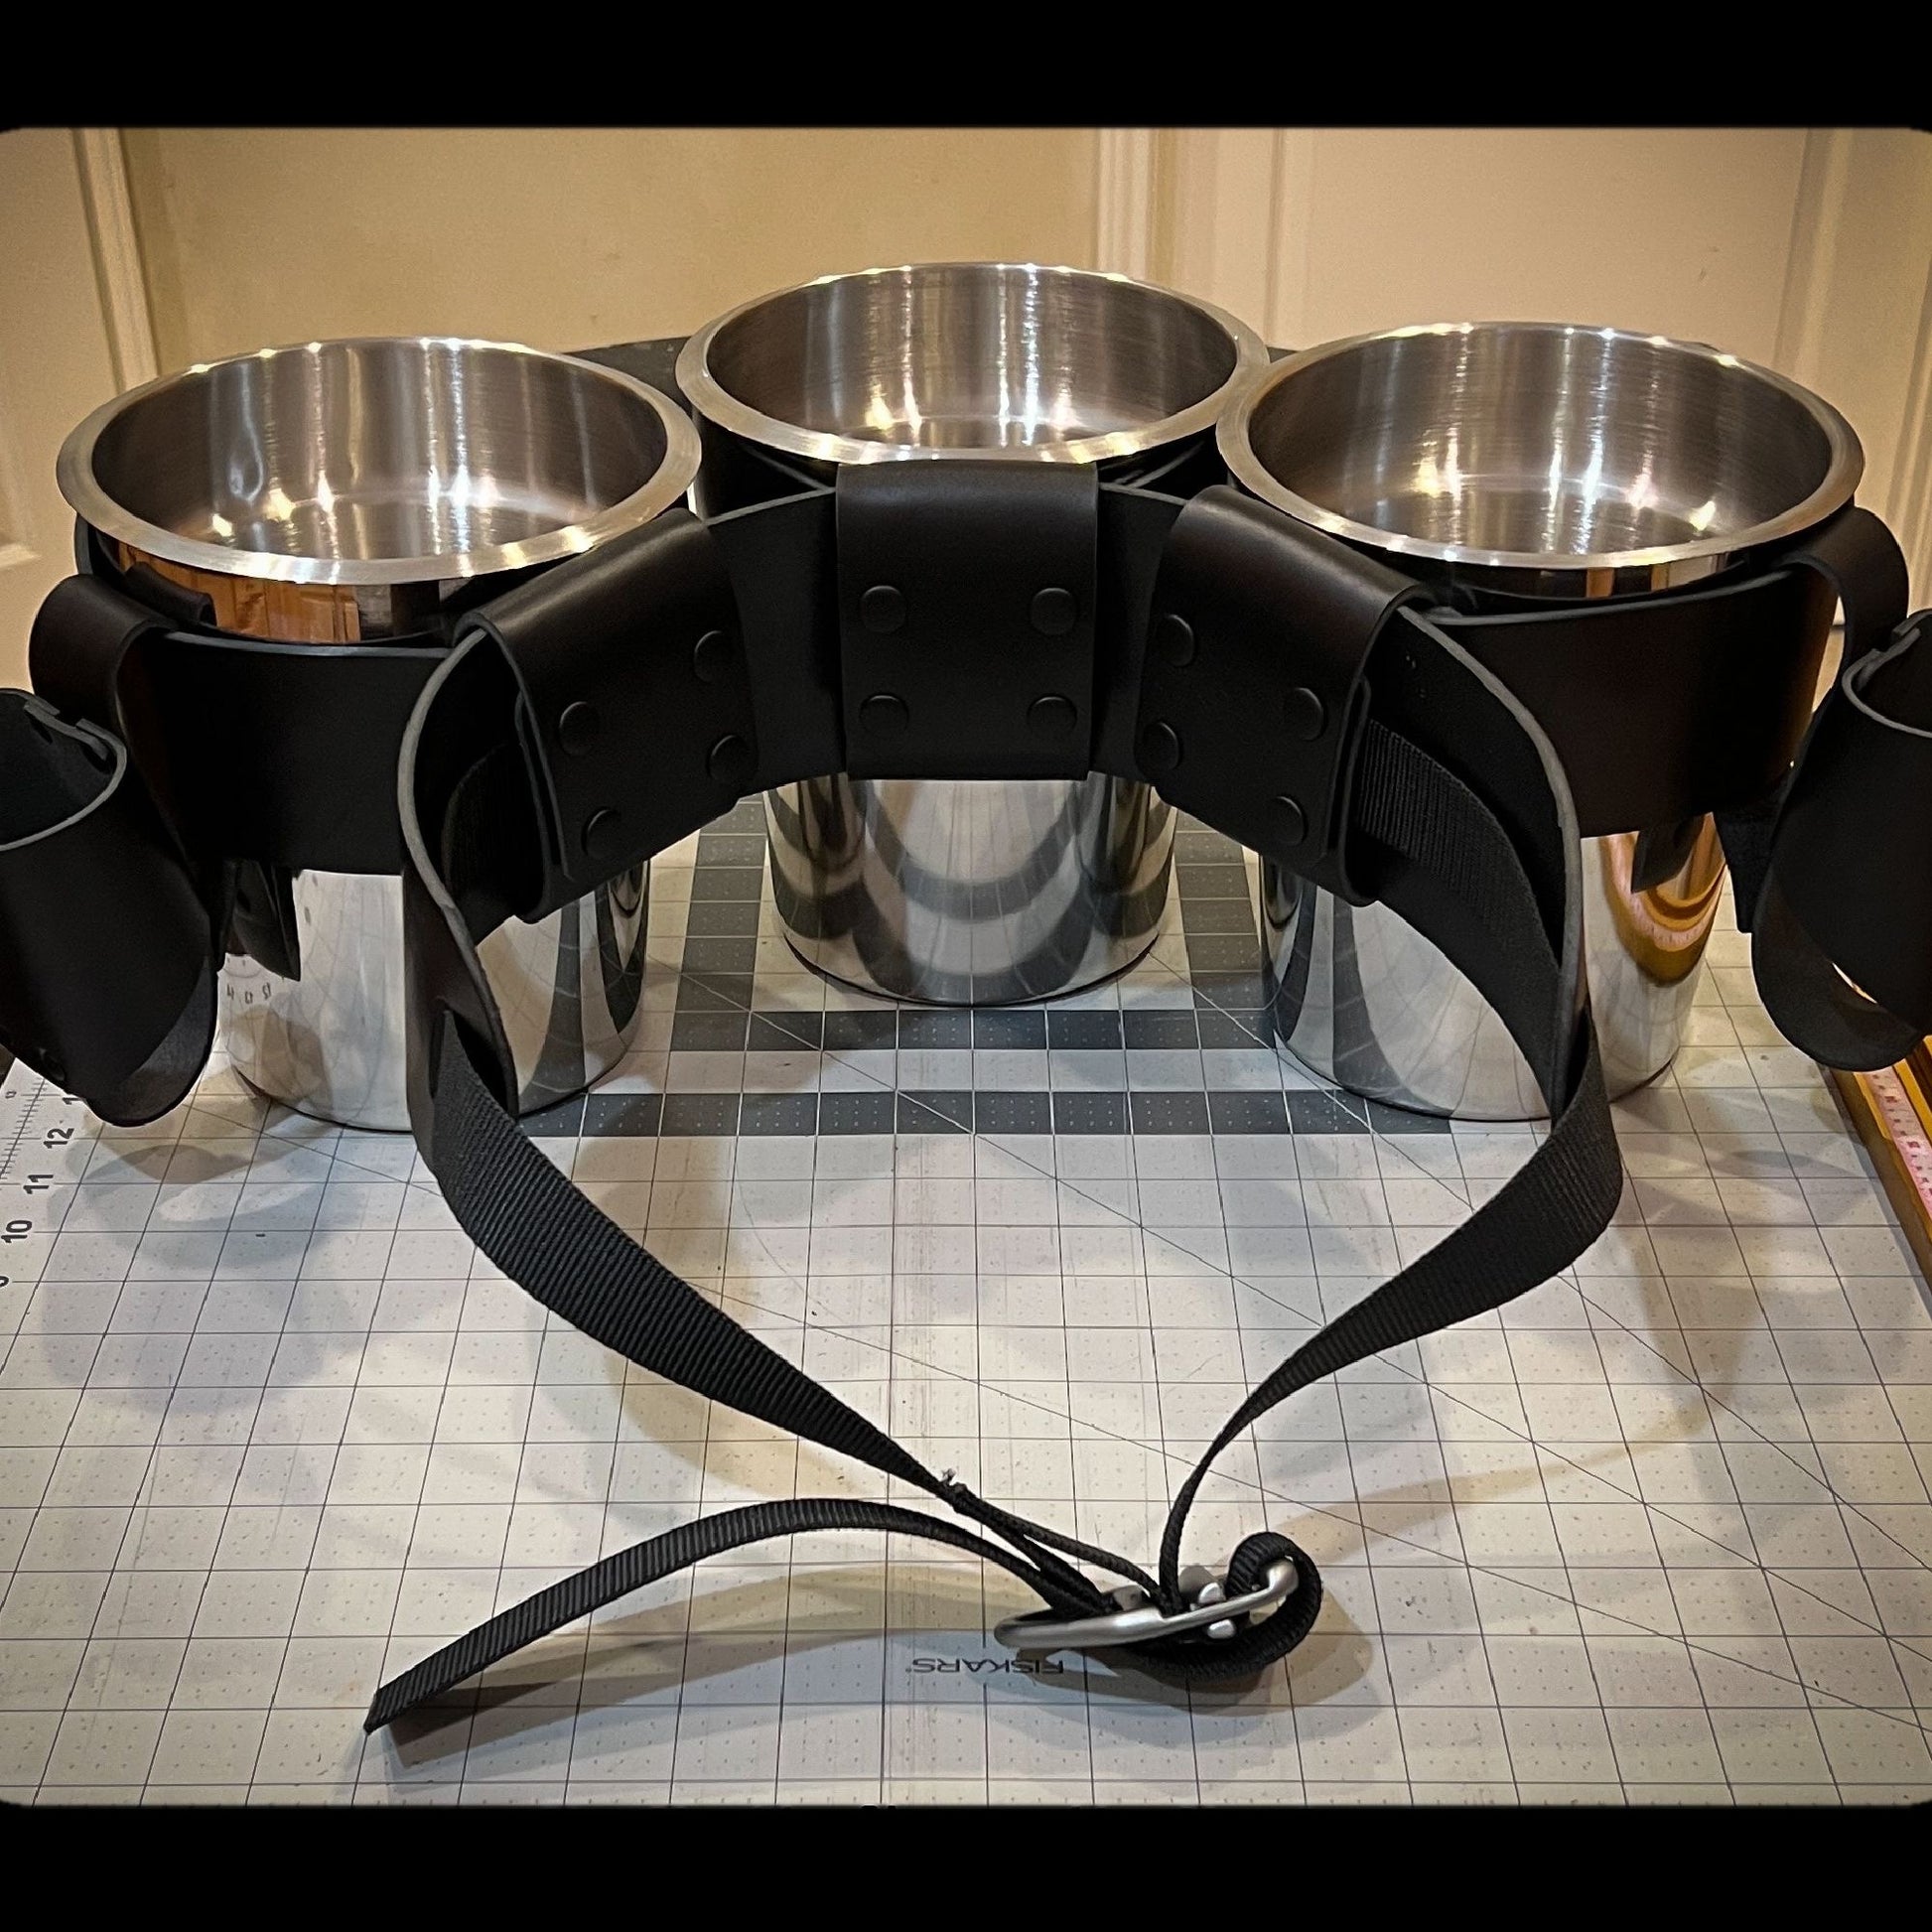 Rear view of Skipper's Oyster Shucker Belt showing the 3 / 2 configuration of pots and condiment holders.